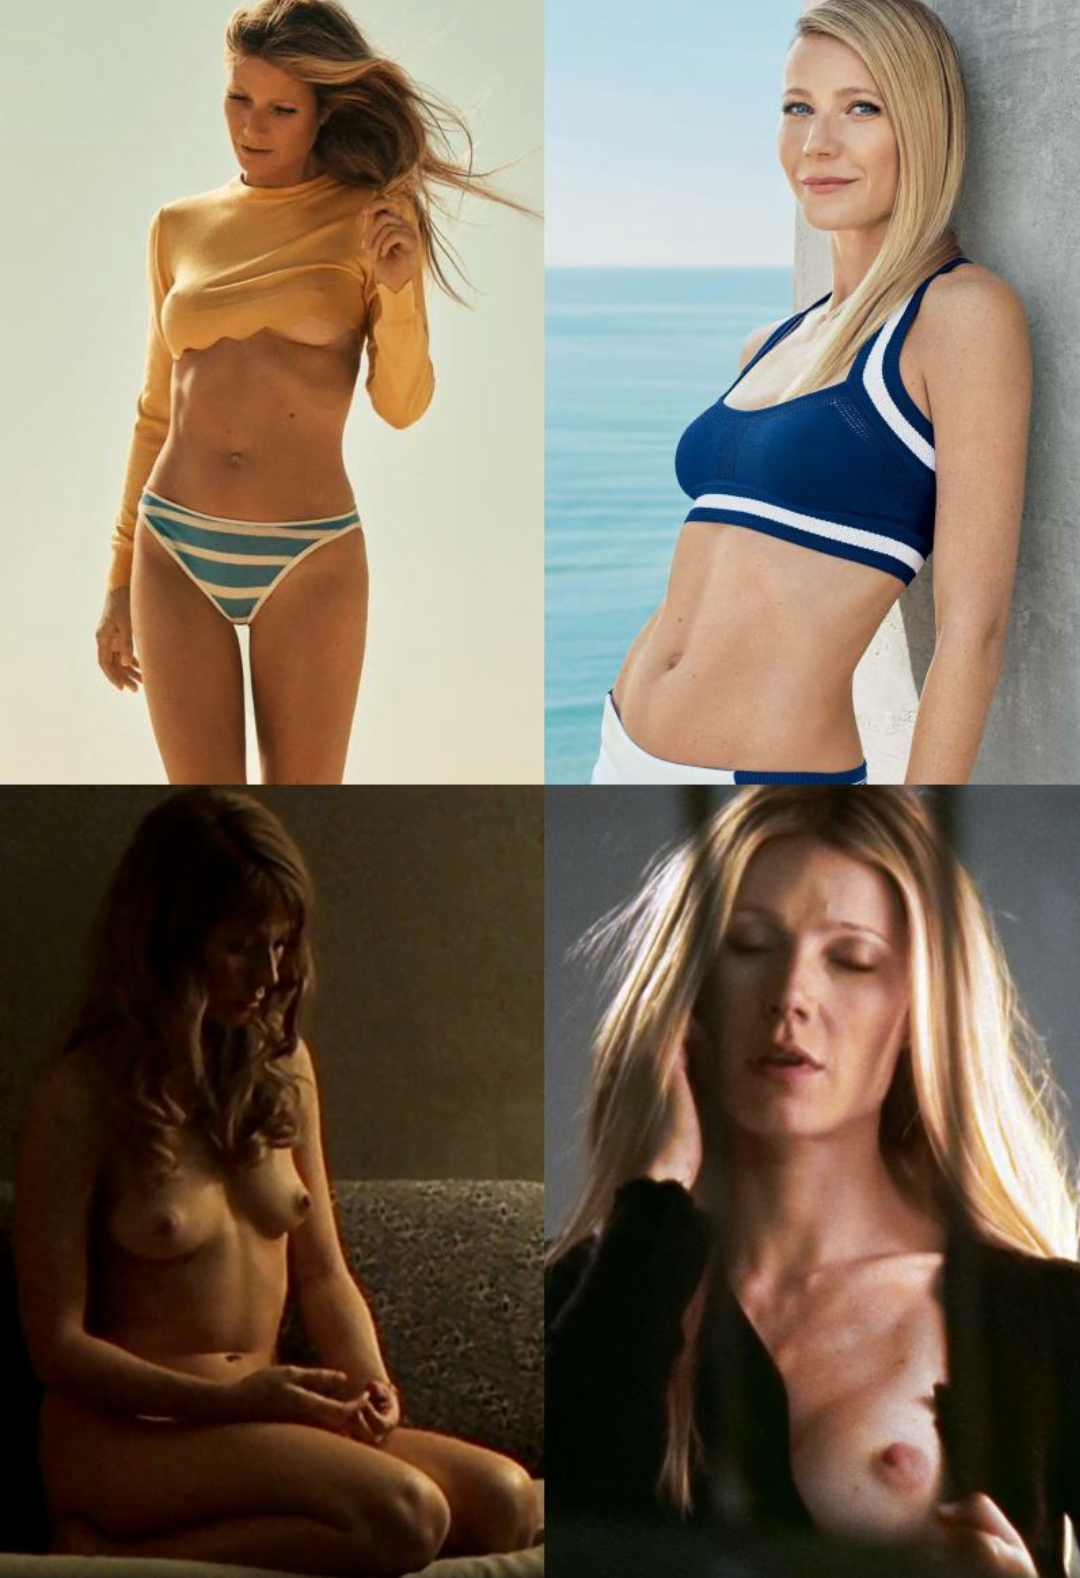 Would love to see Gwyneth Paltrow dominated in a Sex